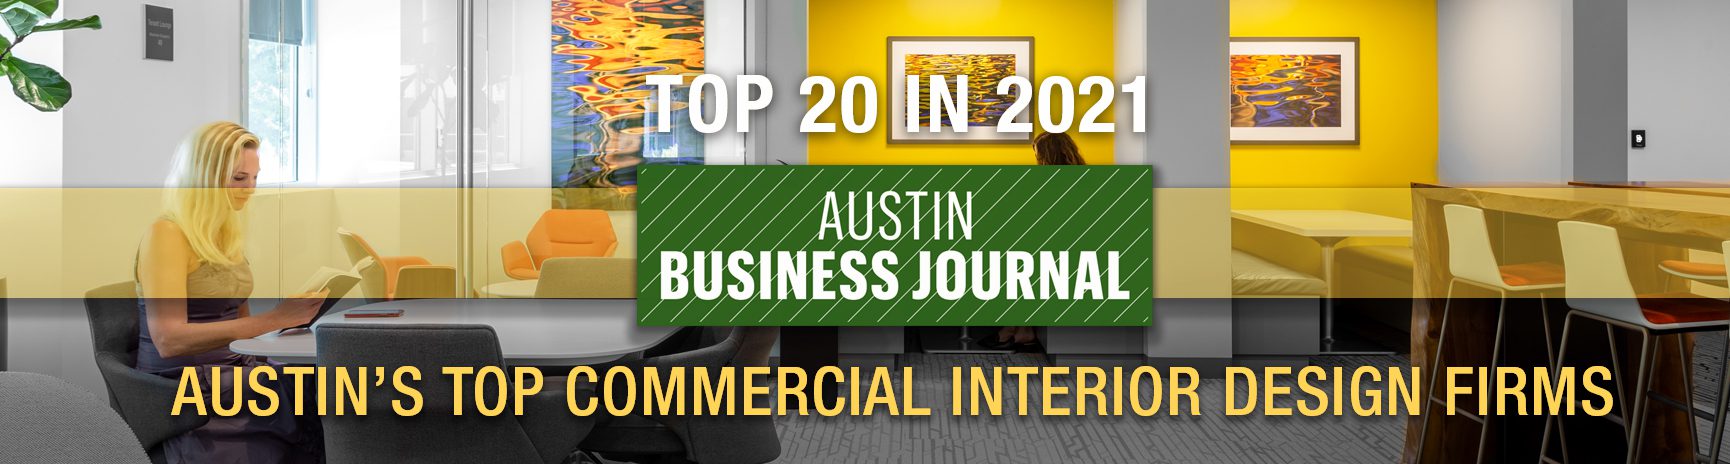 ABJ Top 20 Commercial Interior Design Firms